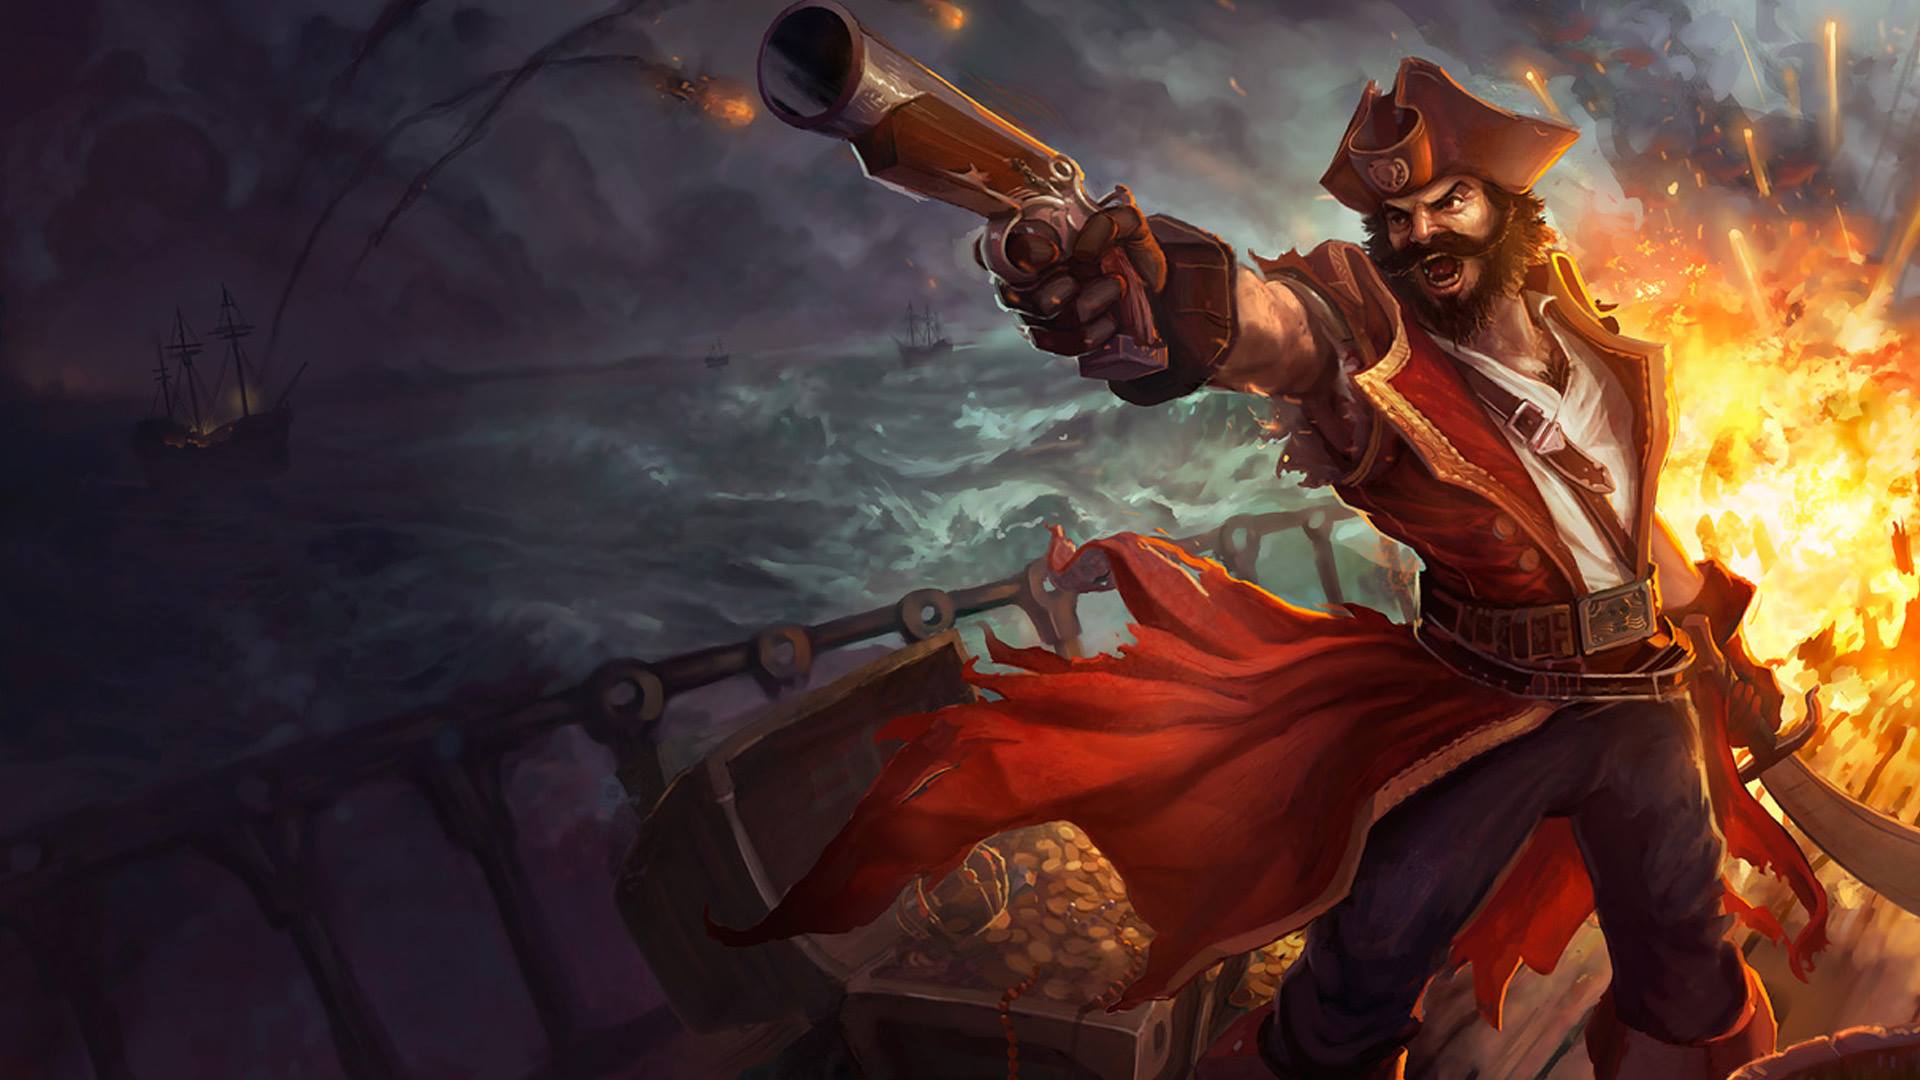 General 1920x1080 pirates fire Gangplank (League of Legends) League of Legends video games gun video game men video game characters explosion PC gaming video game art treasure aiming